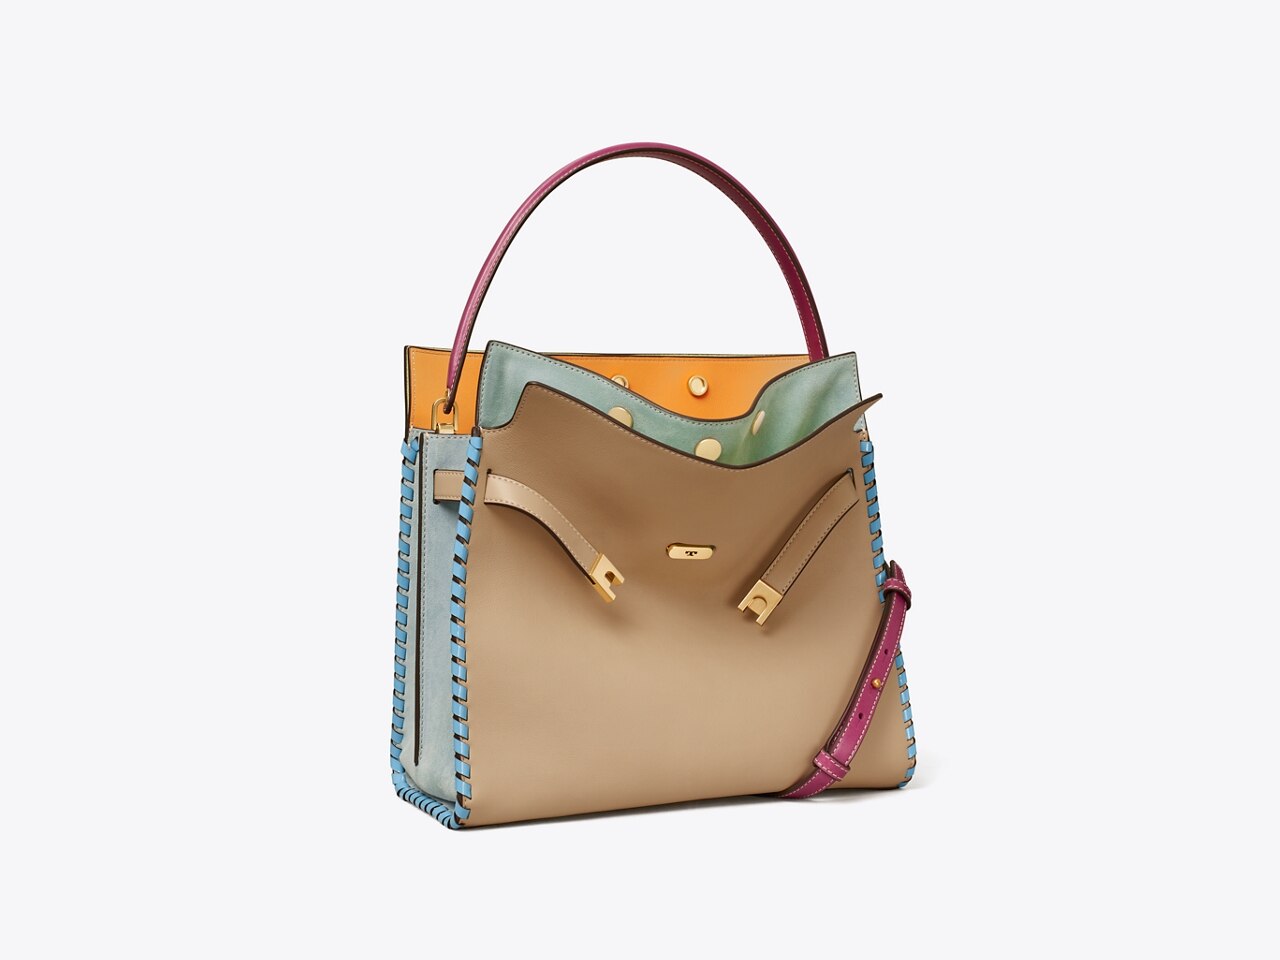 Tory Burch - Our Lee Radziwill Double Bag contrasts structure and